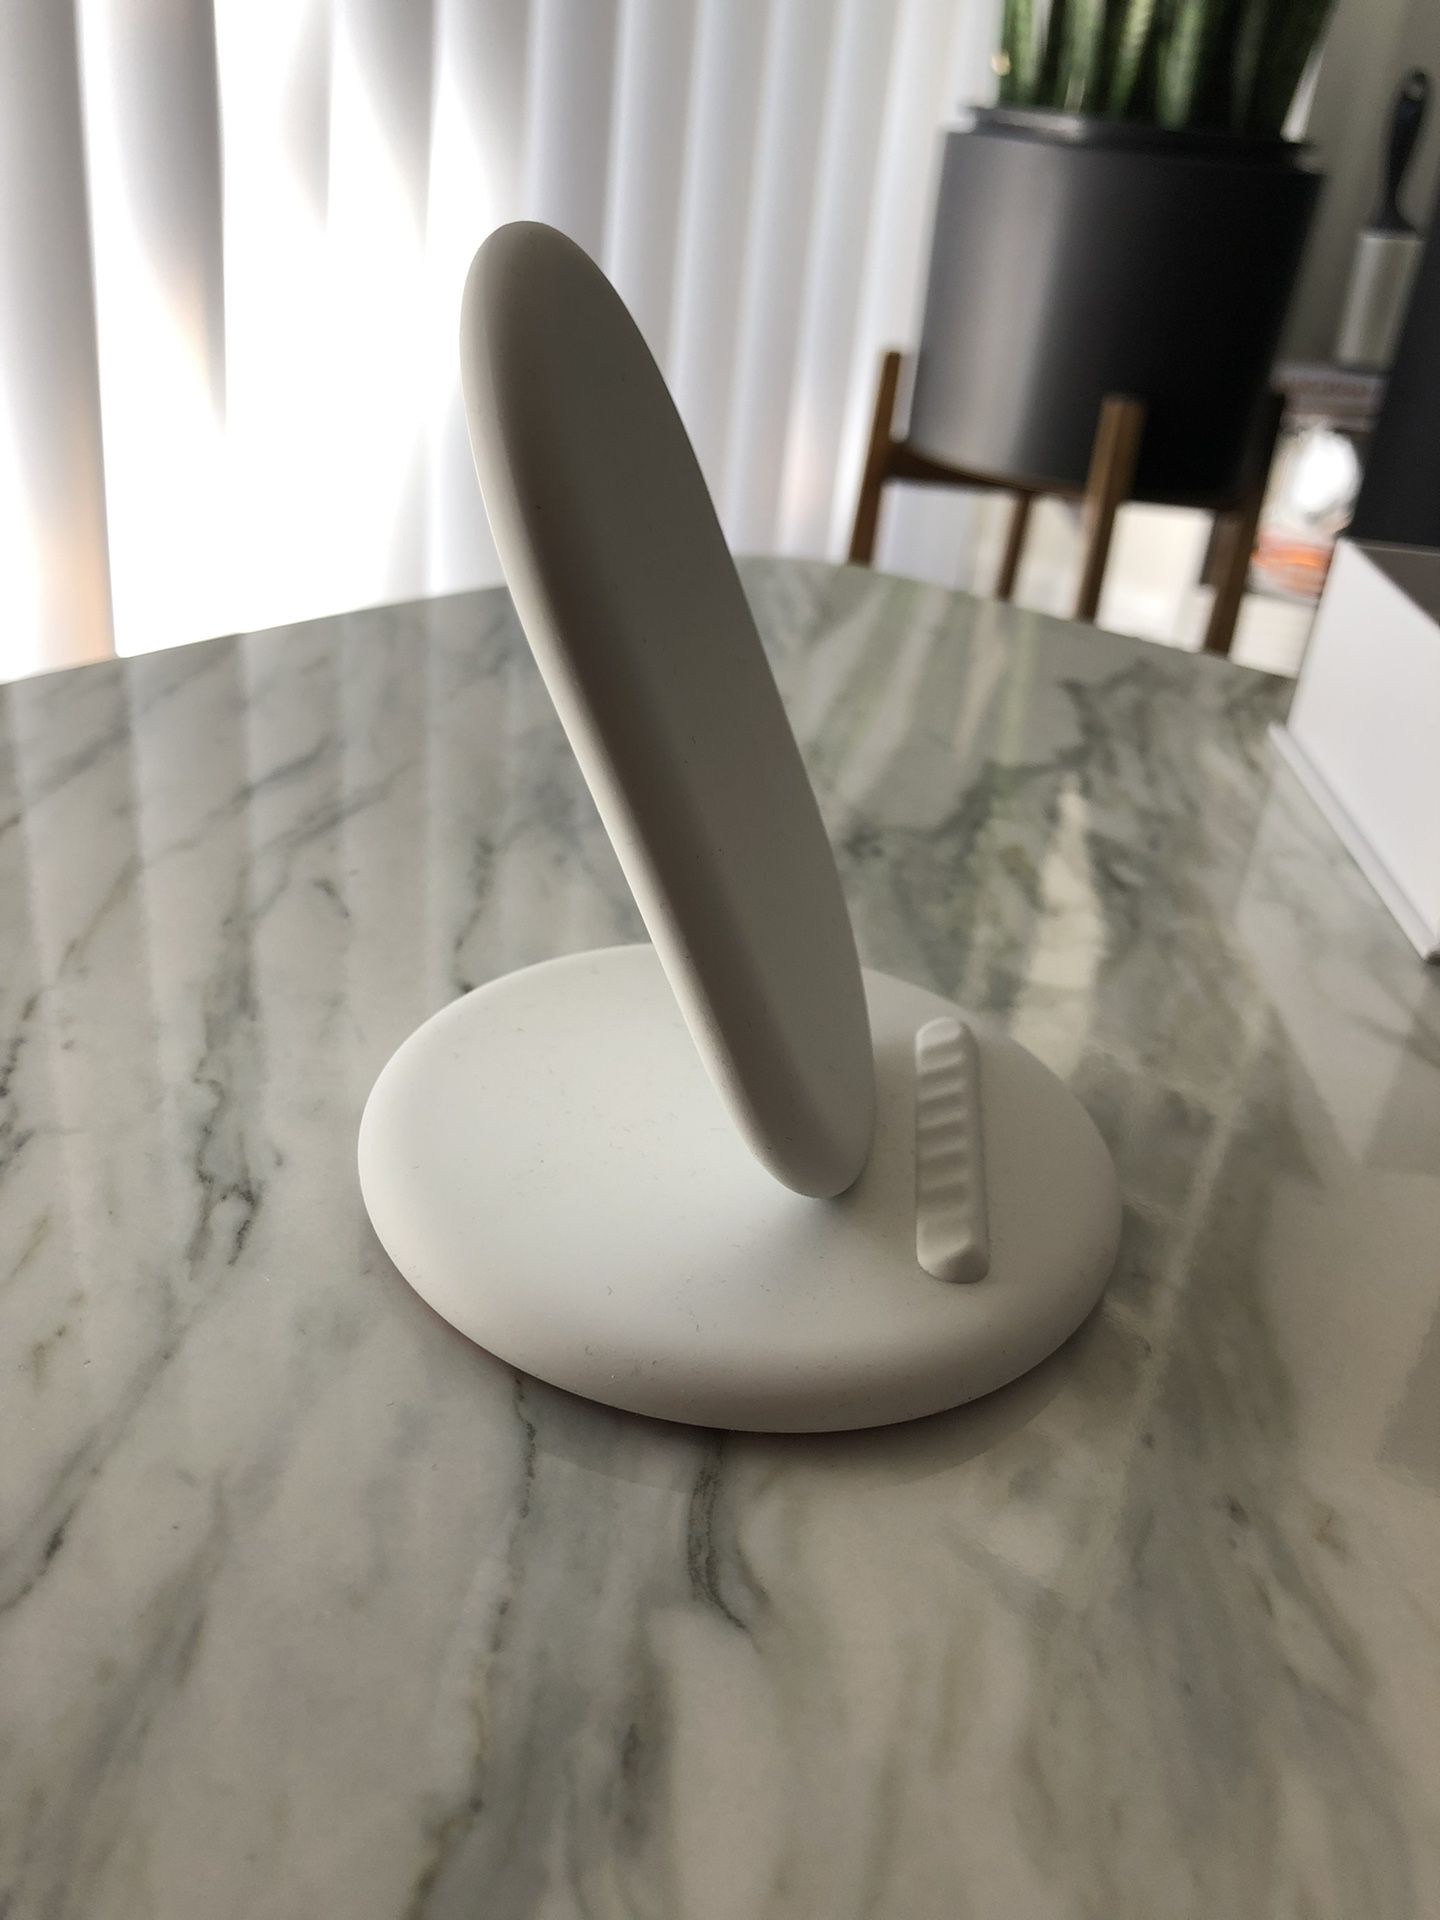 Google Pixel Stand Wireless Phone Charger (White)